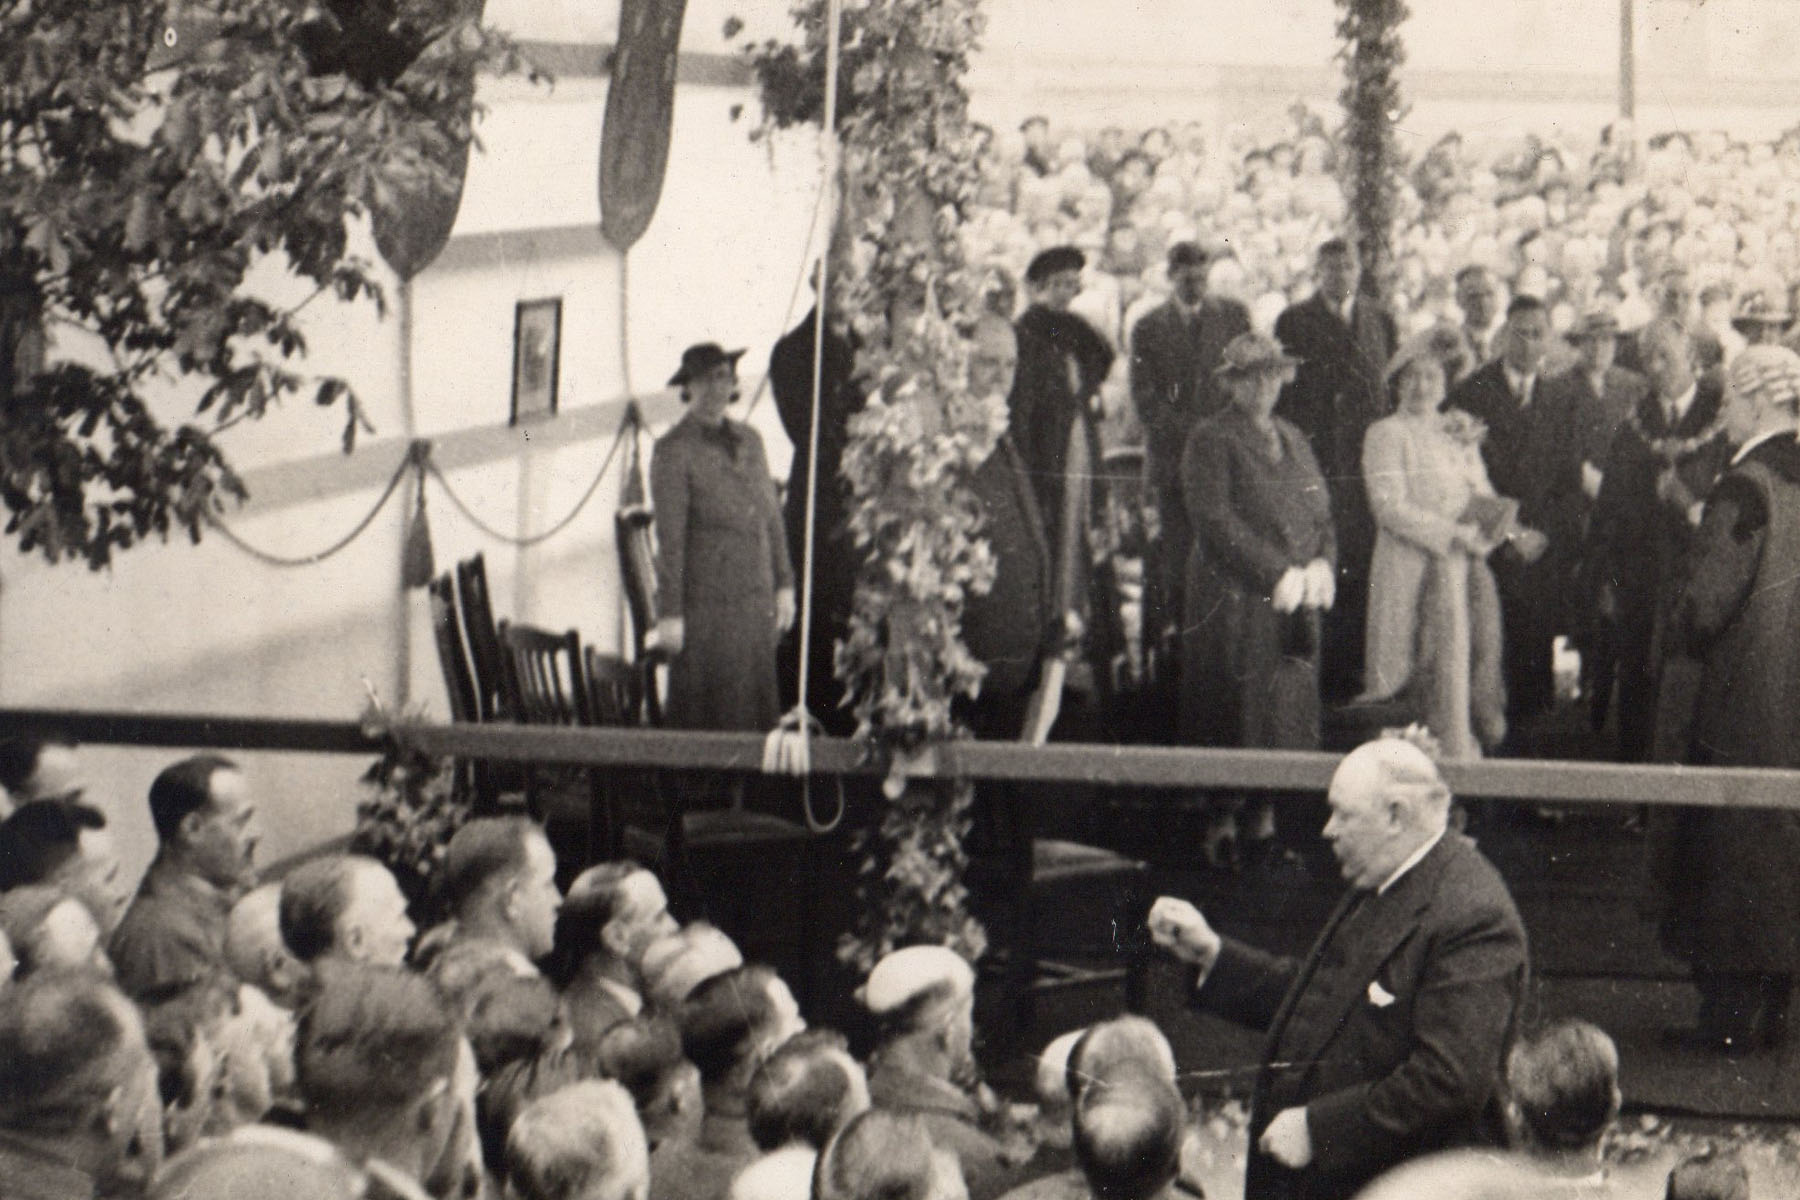 Luther conducting the Orpheus for a royal visit in 1938 in a marquee at Hyde Park Corner, Colne. Queen Elizabeth the Queen Mother and King George VI can be seen directly behind him